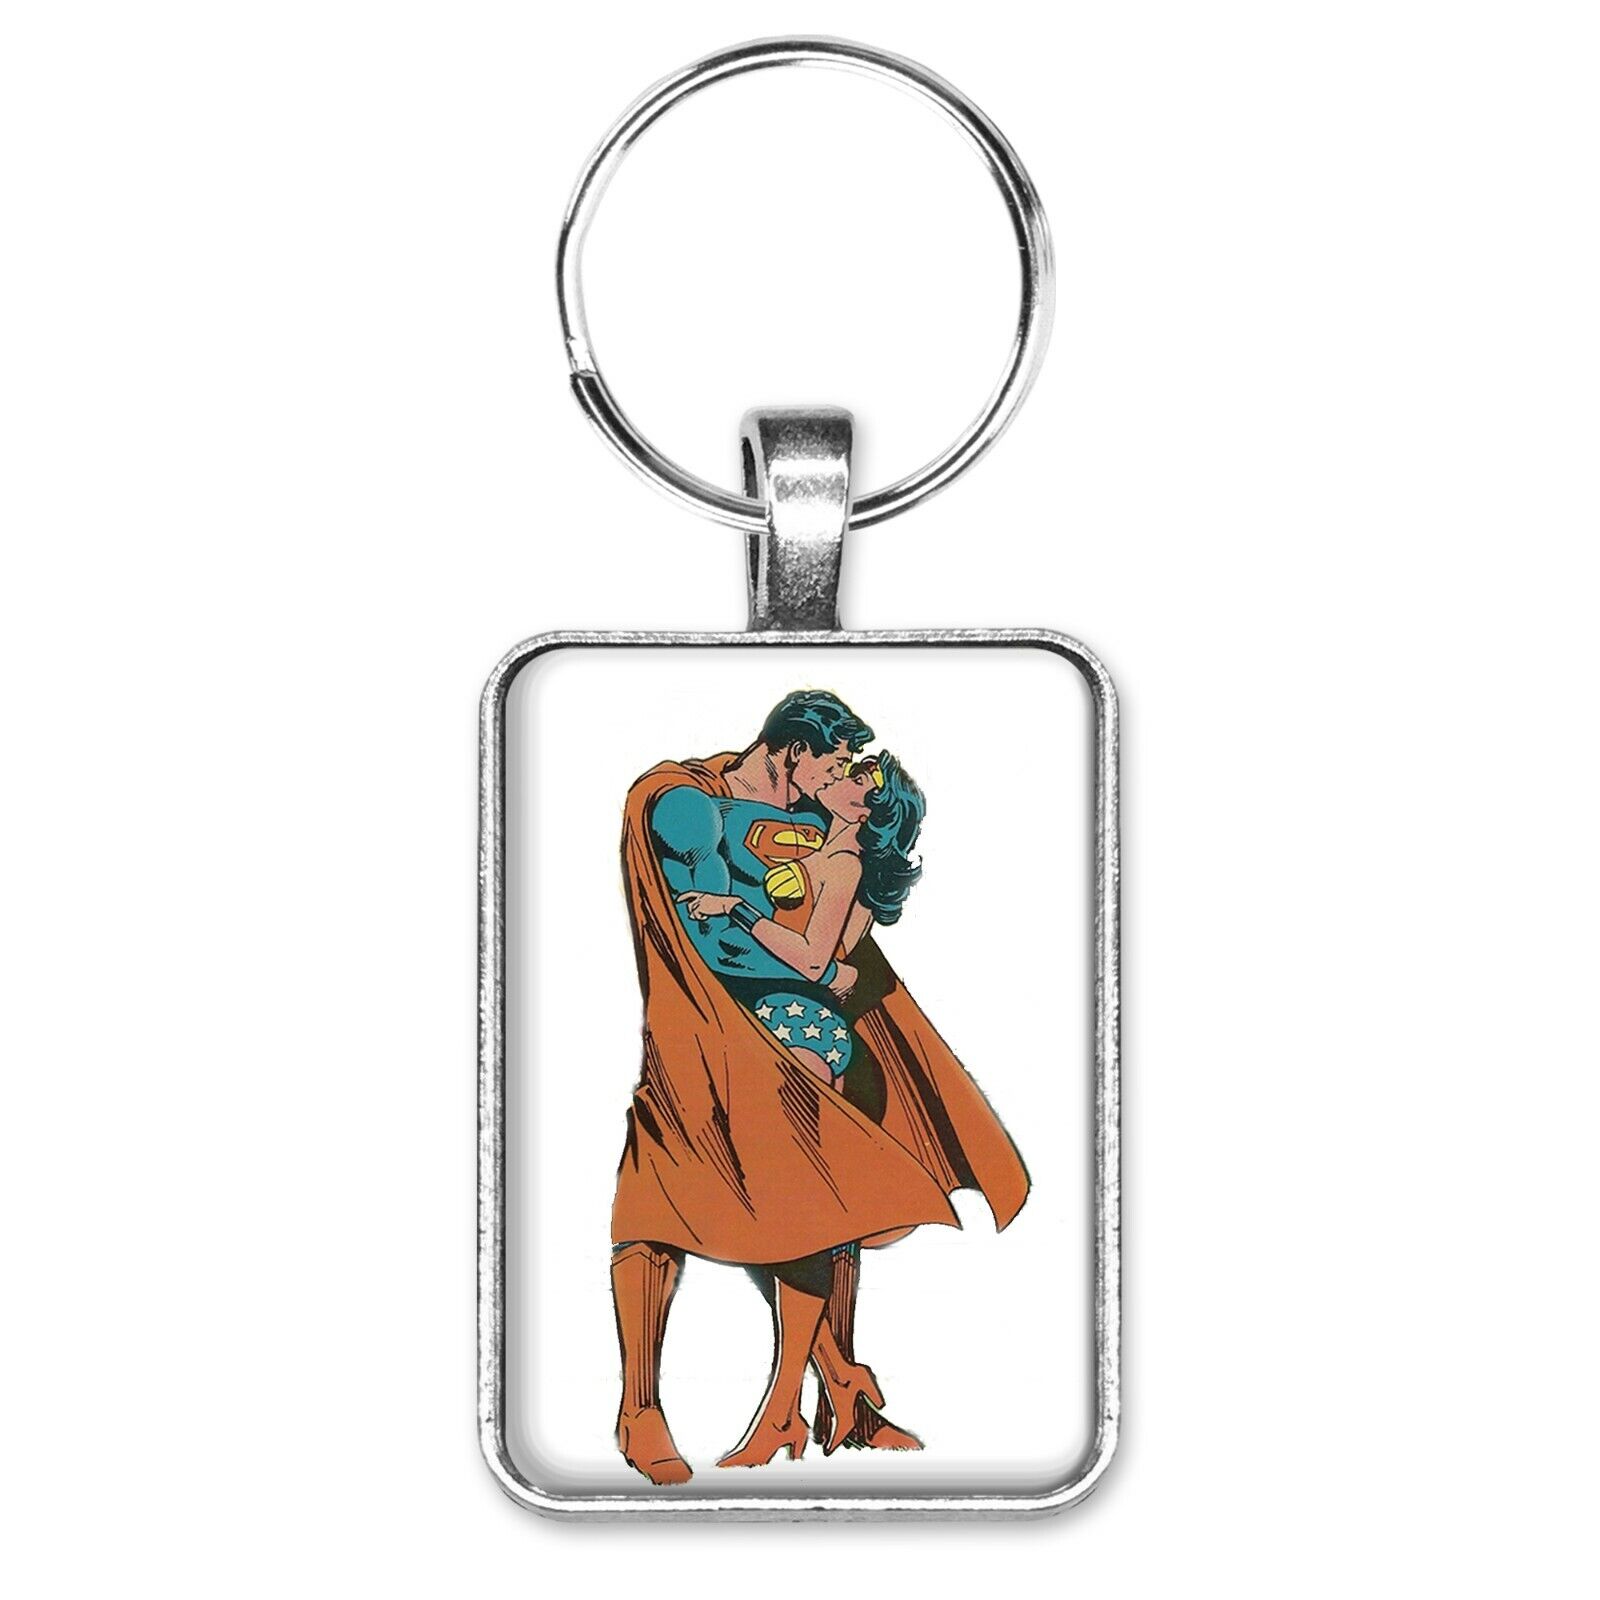 Superman Embraces Wonder Woman Key Ring or Necklace Superheroes Kissing Jewelry